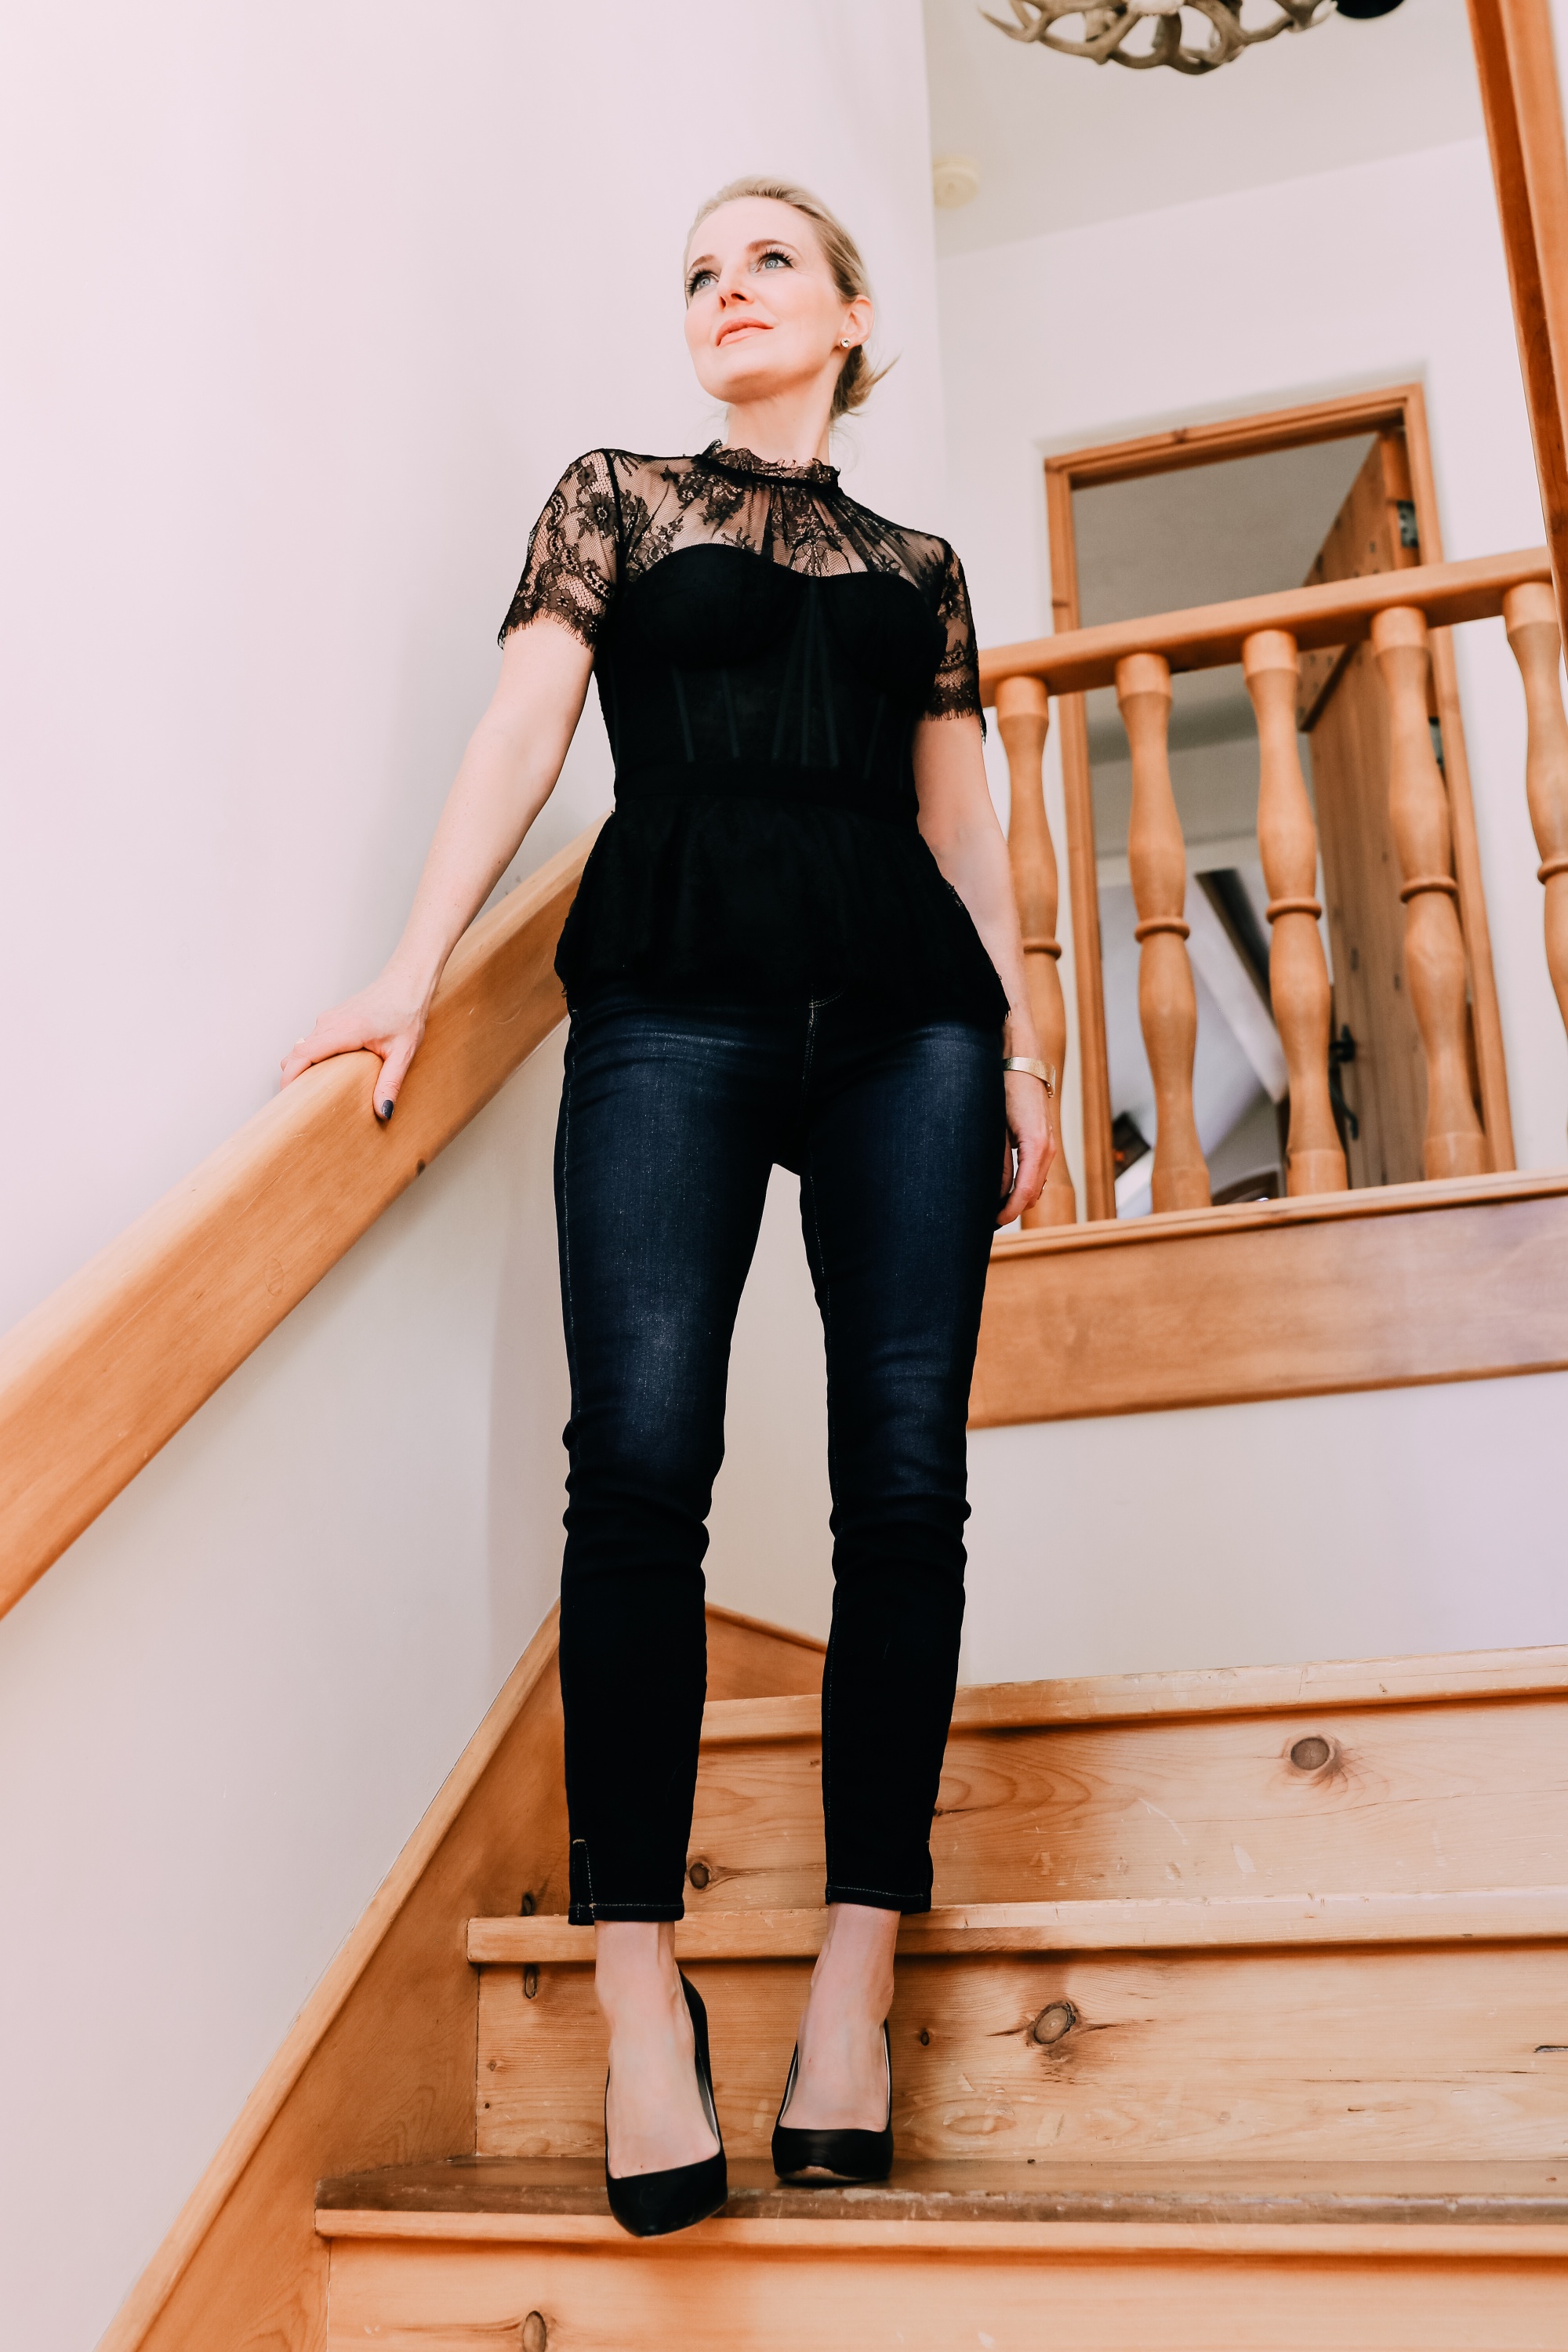 Holiday Outfits With Jeans, Erin Busbee of Busbee Style wearing a black lace corset top by Jonathan Simkhai, L'Agence dark wash skinny jeans, and black Jimmy Choo Romy pumps from Nordstrom in Telluride, Colorado